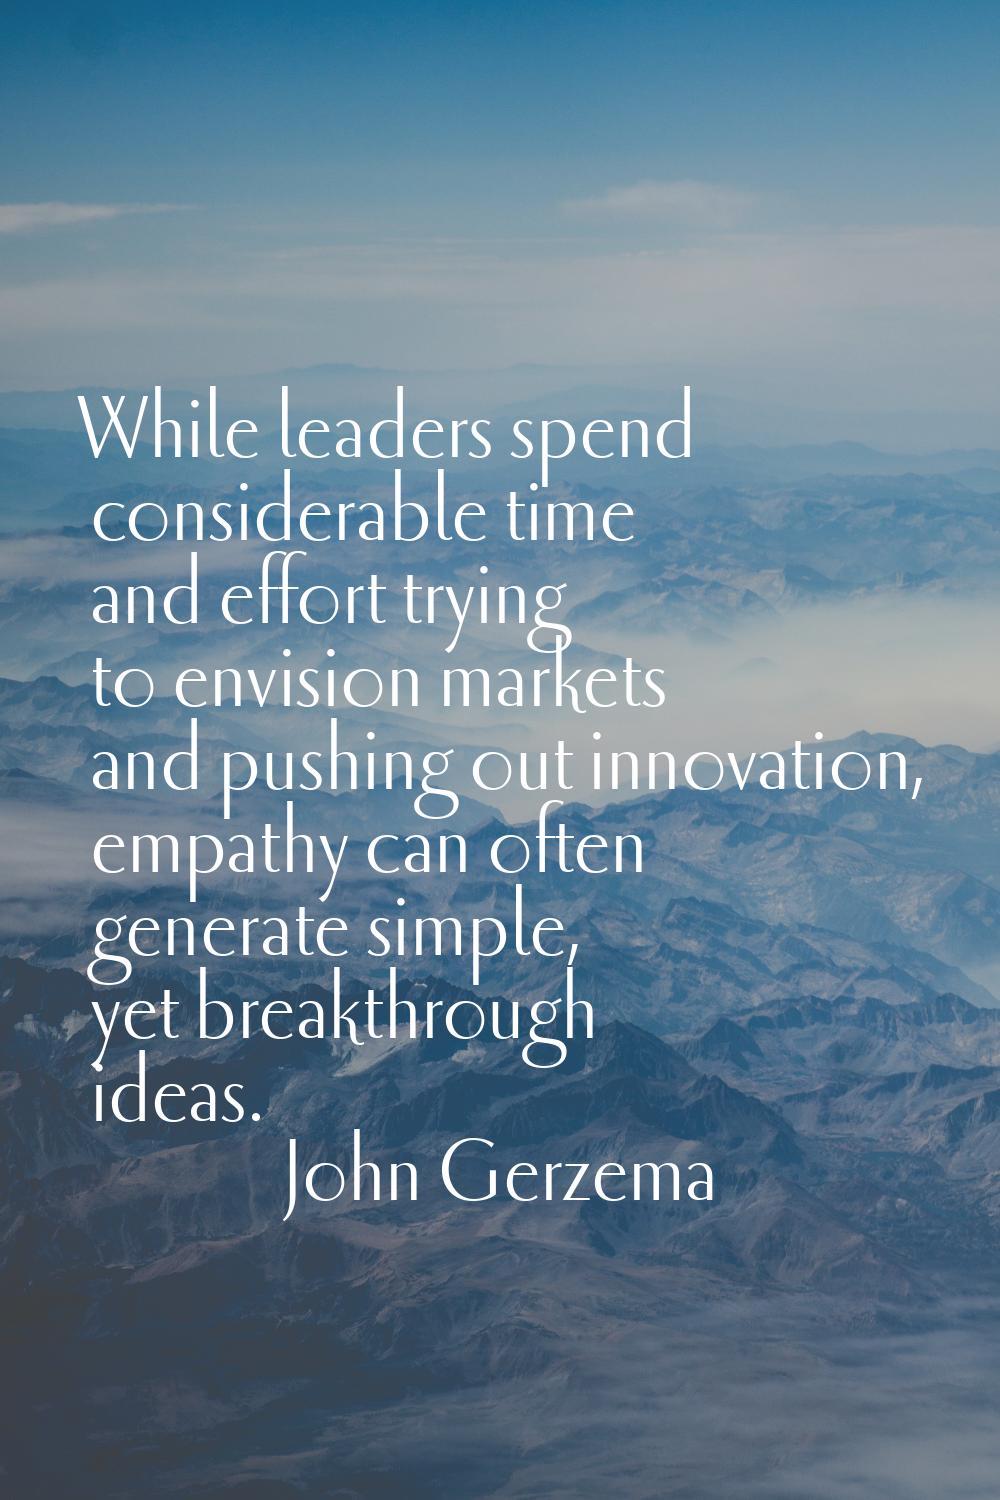 While leaders spend considerable time and effort trying to envision markets and pushing out innovat